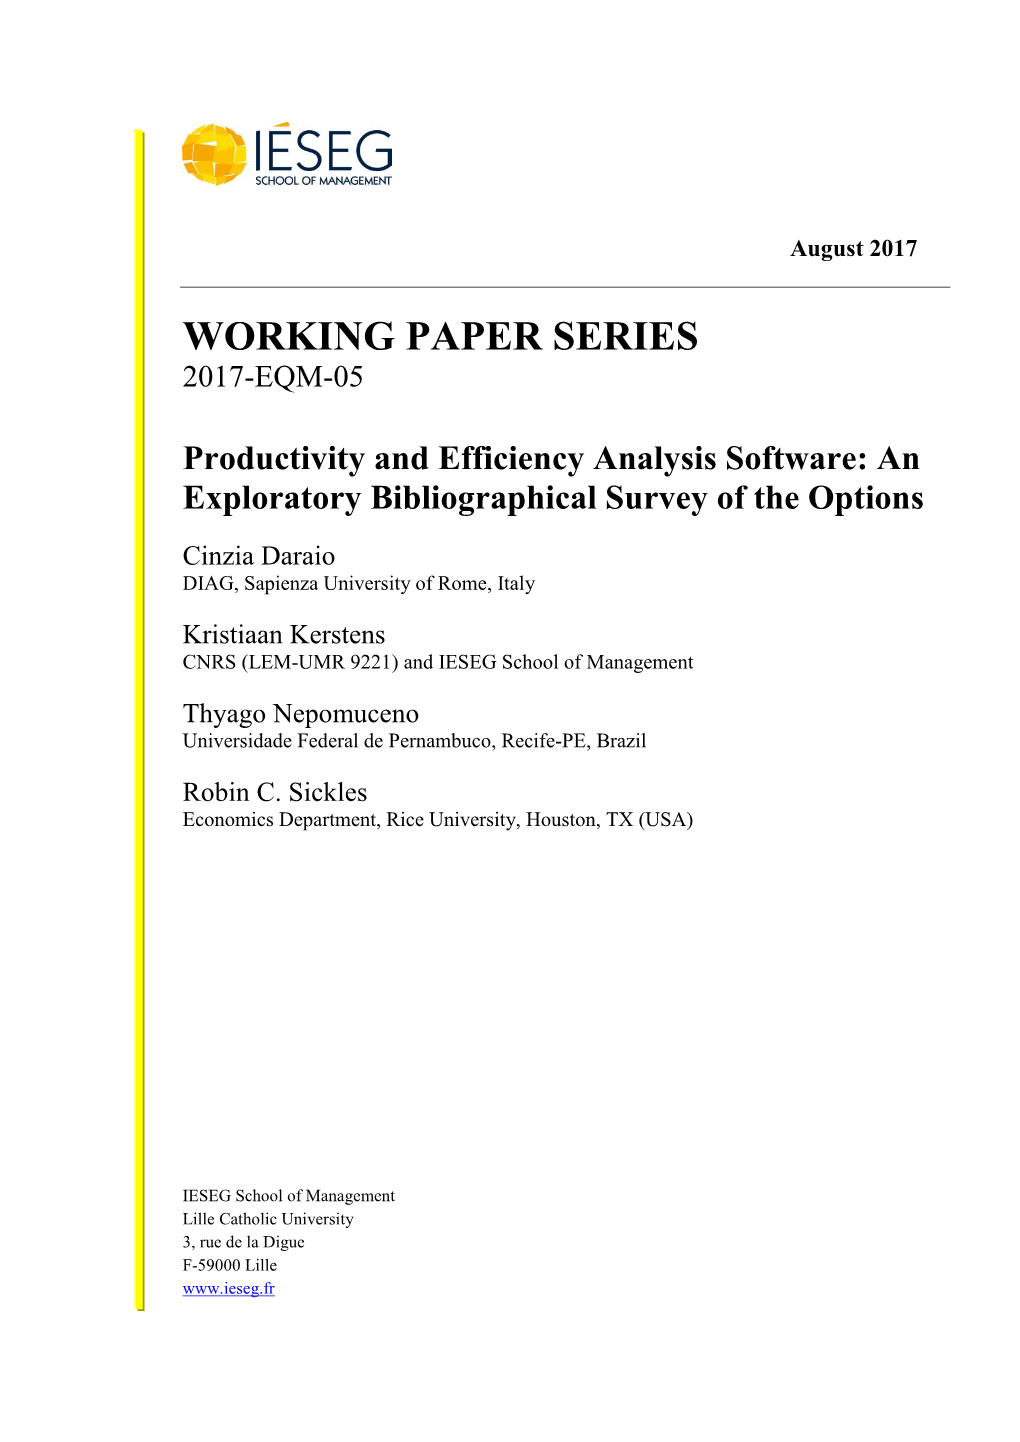 Productivity and Efficiency Analysis Software: an Exploratory Bibliographical Survey of the Options